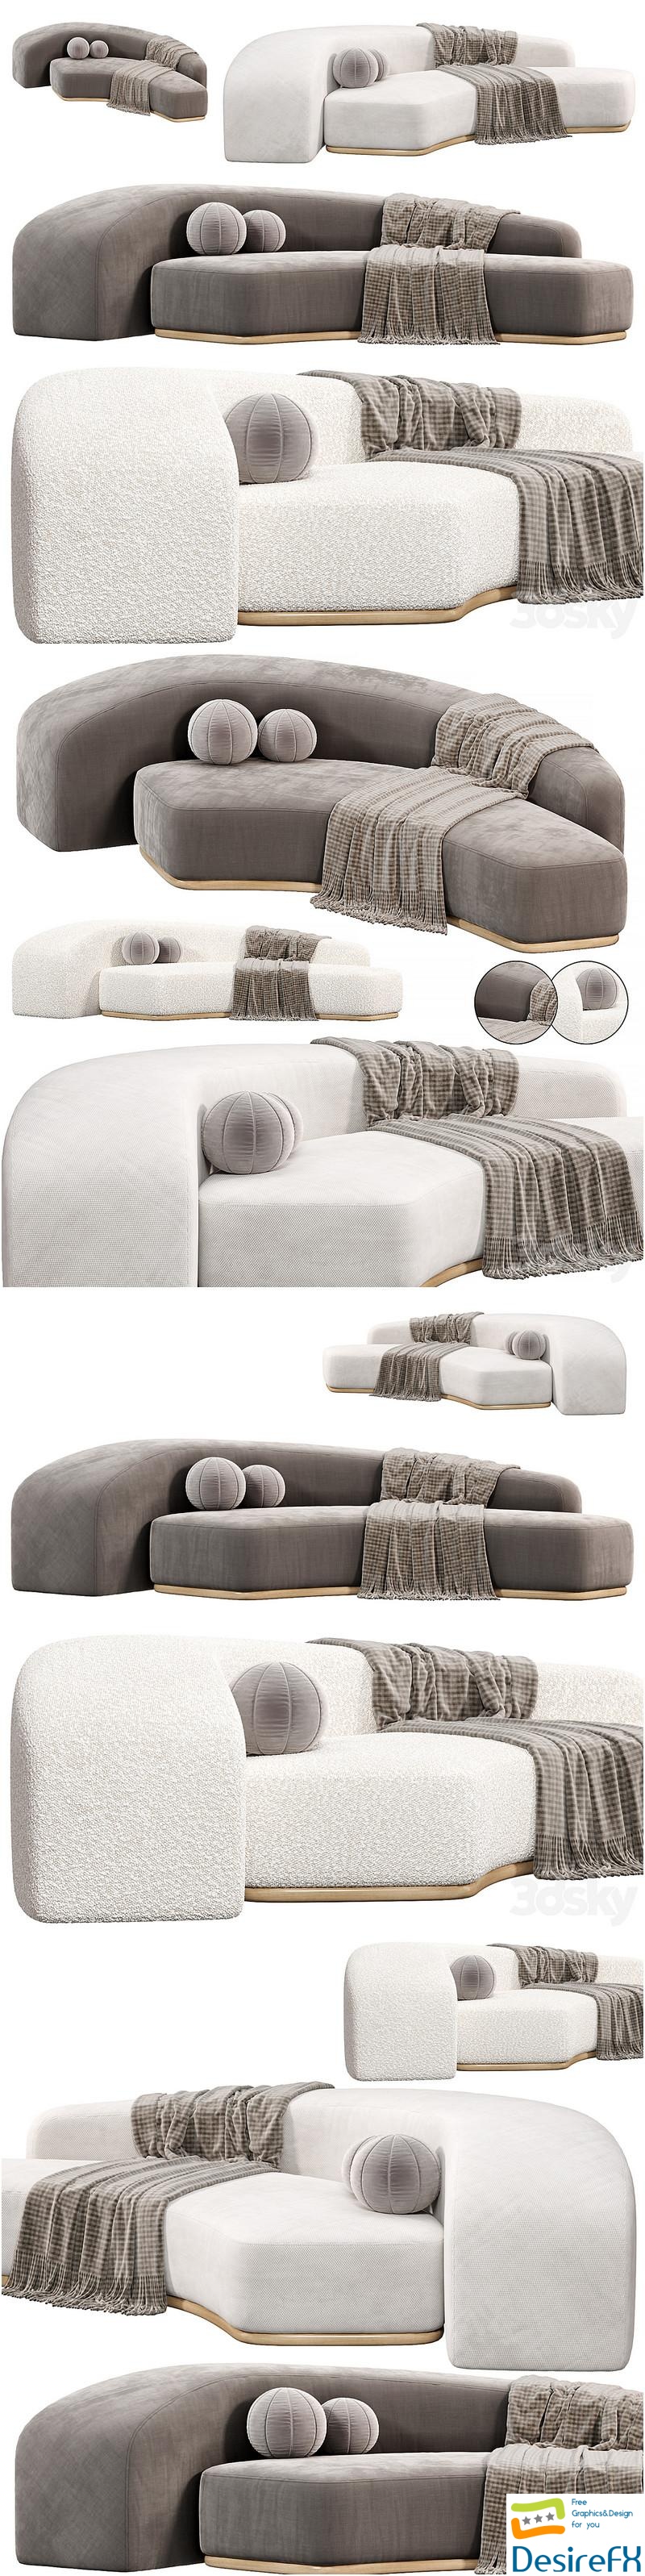 LS28B DAYBED Sofa By LUCA STEFANO, sofas 3D Model